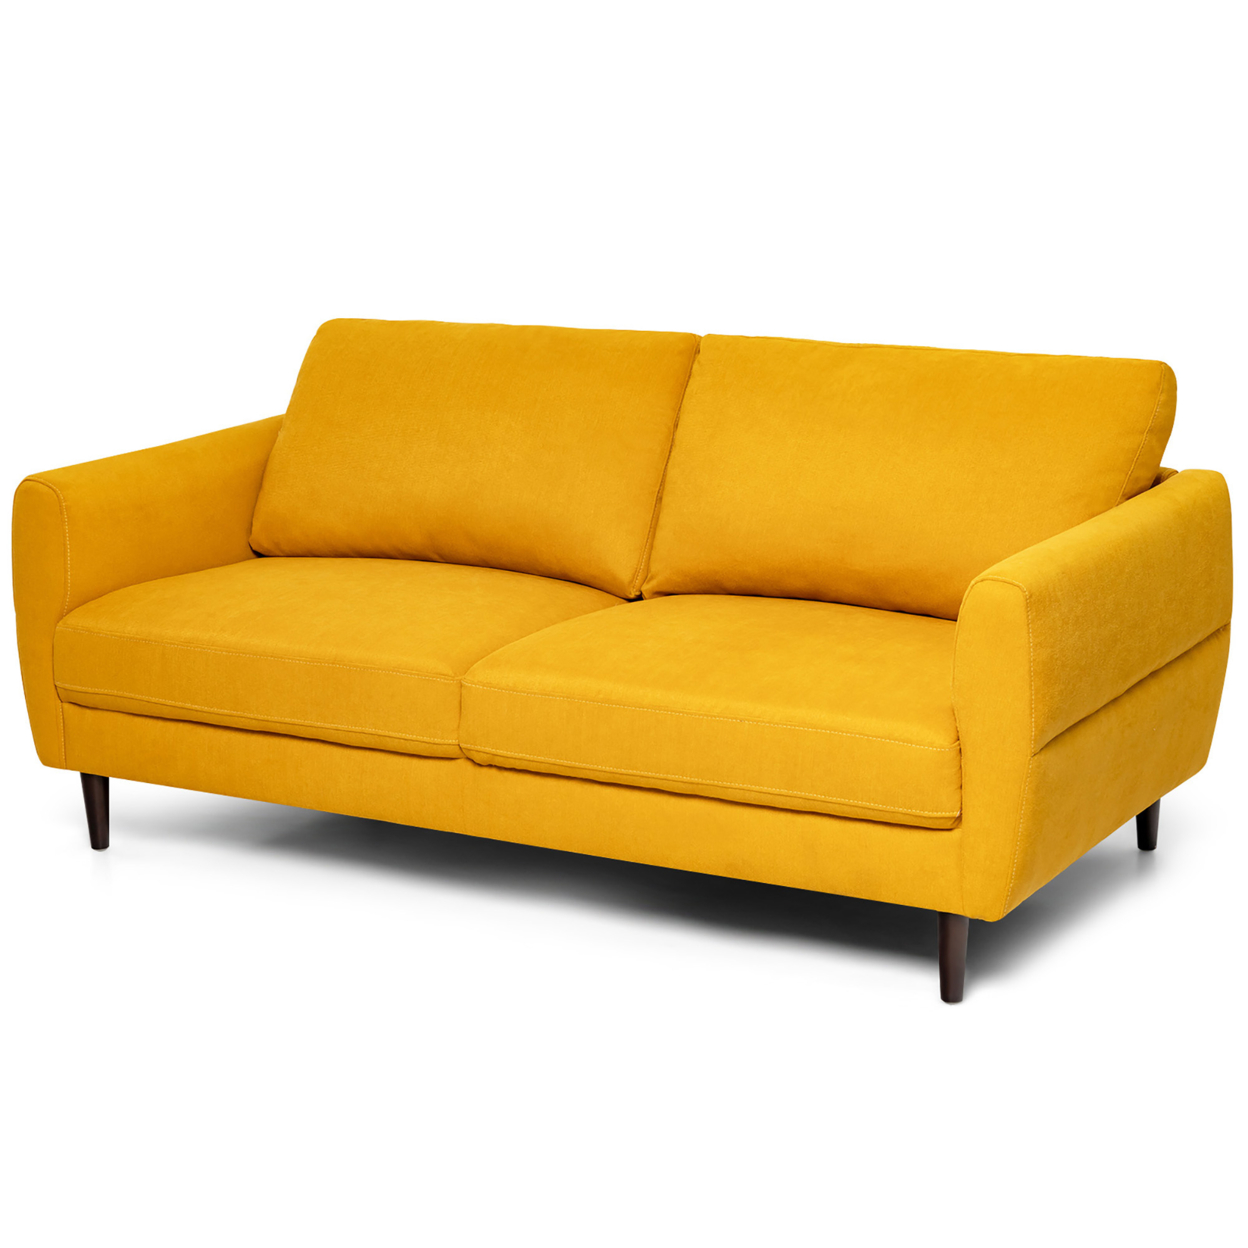 72'' Fabric Sofa Couch Living Room Small Apartment Furniture W/ Wood Legs Yellow